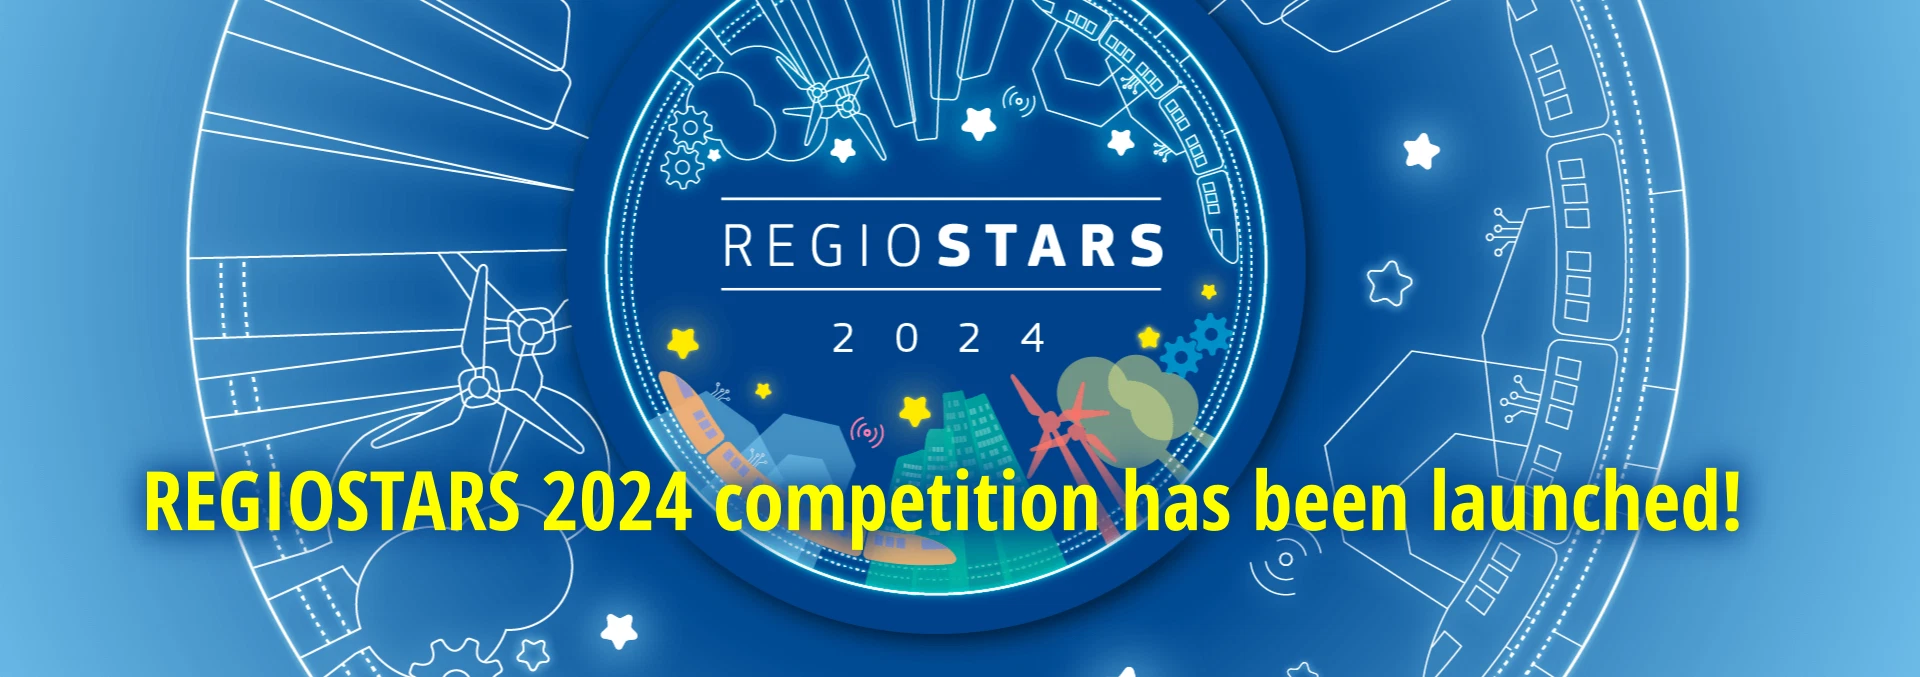 REGIOSTARS 2024 competition has been launched!